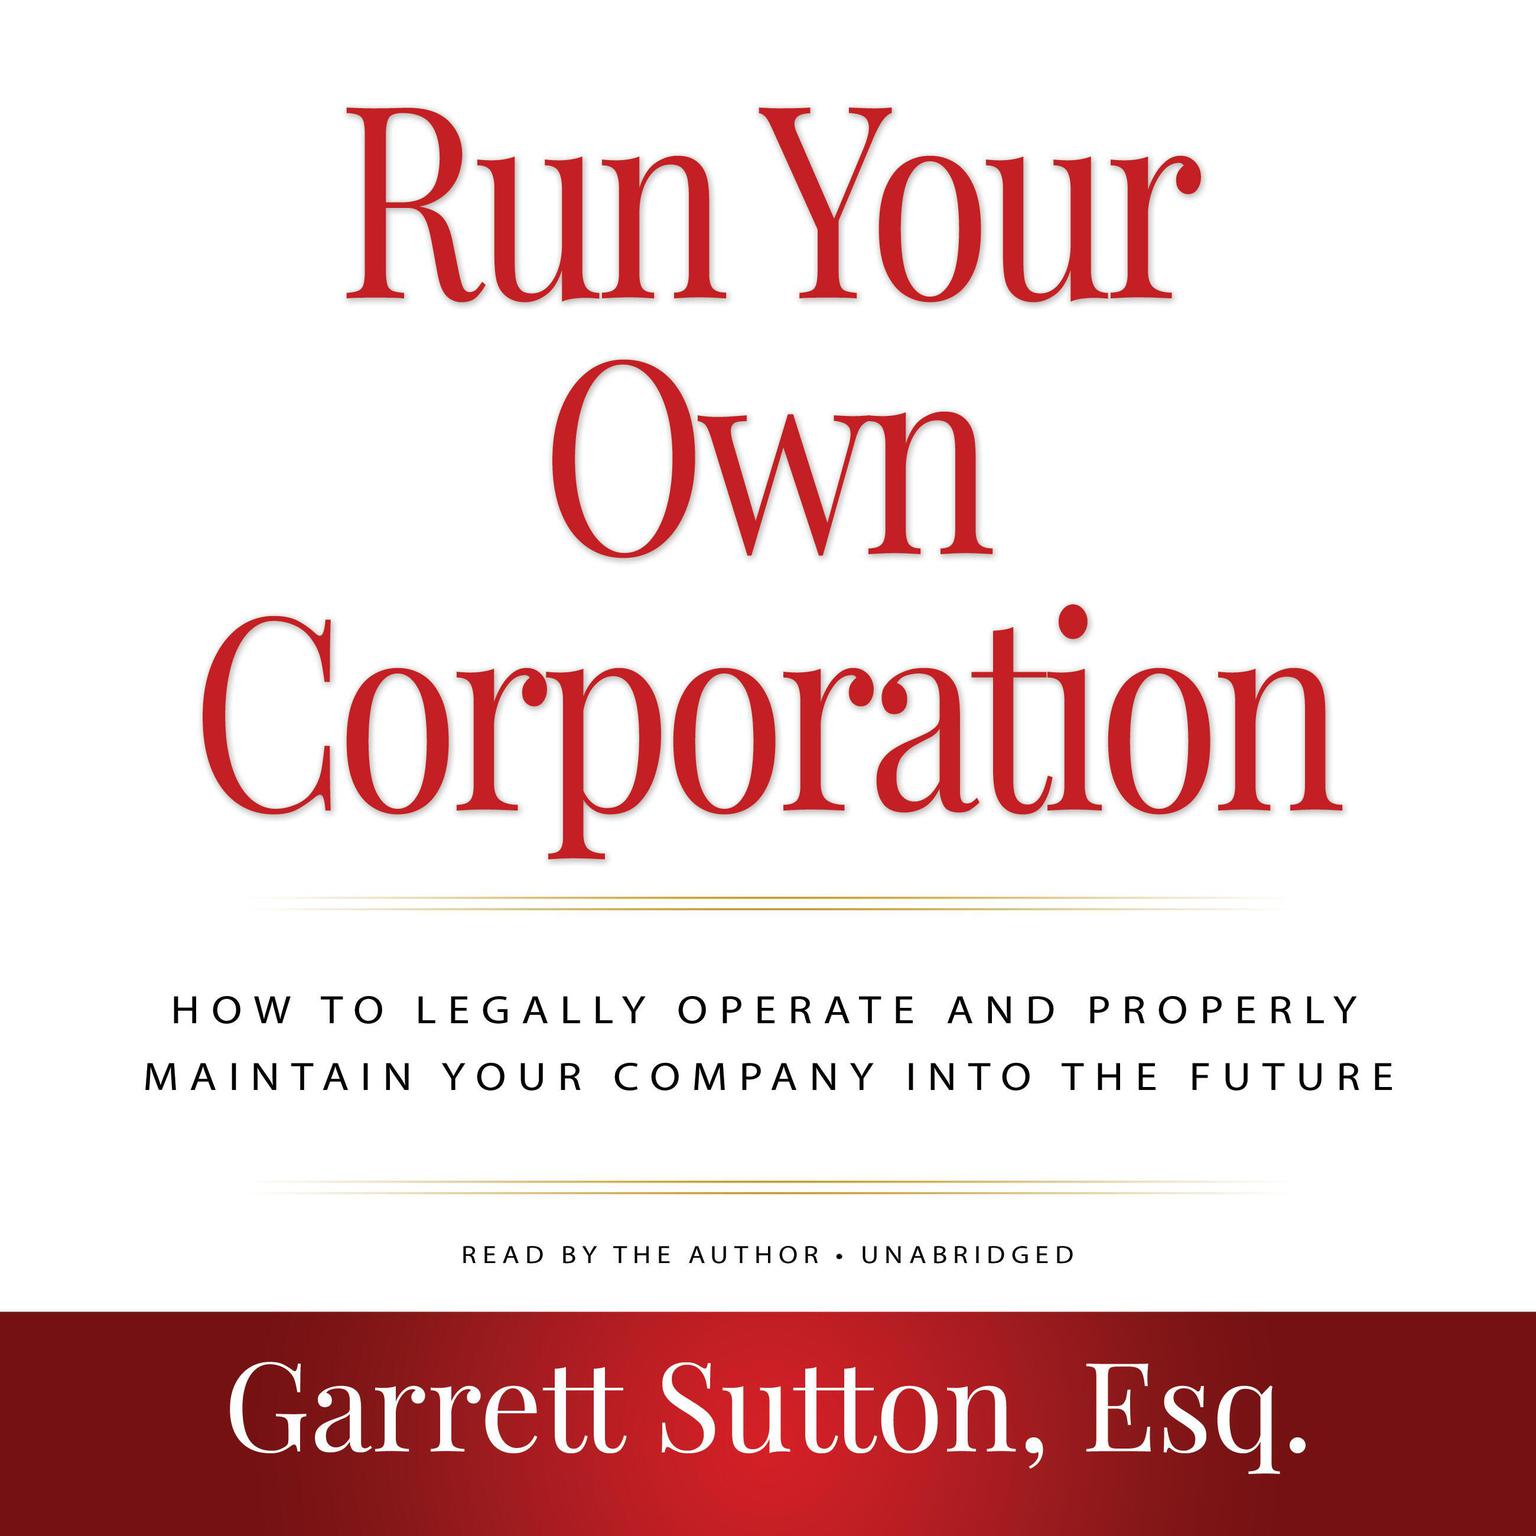 Run Your Own Corporation, 2nd Edition: How to Legally Operate and Properly Maintain Your Company into the Future Audiobook, by Garrett Sutton